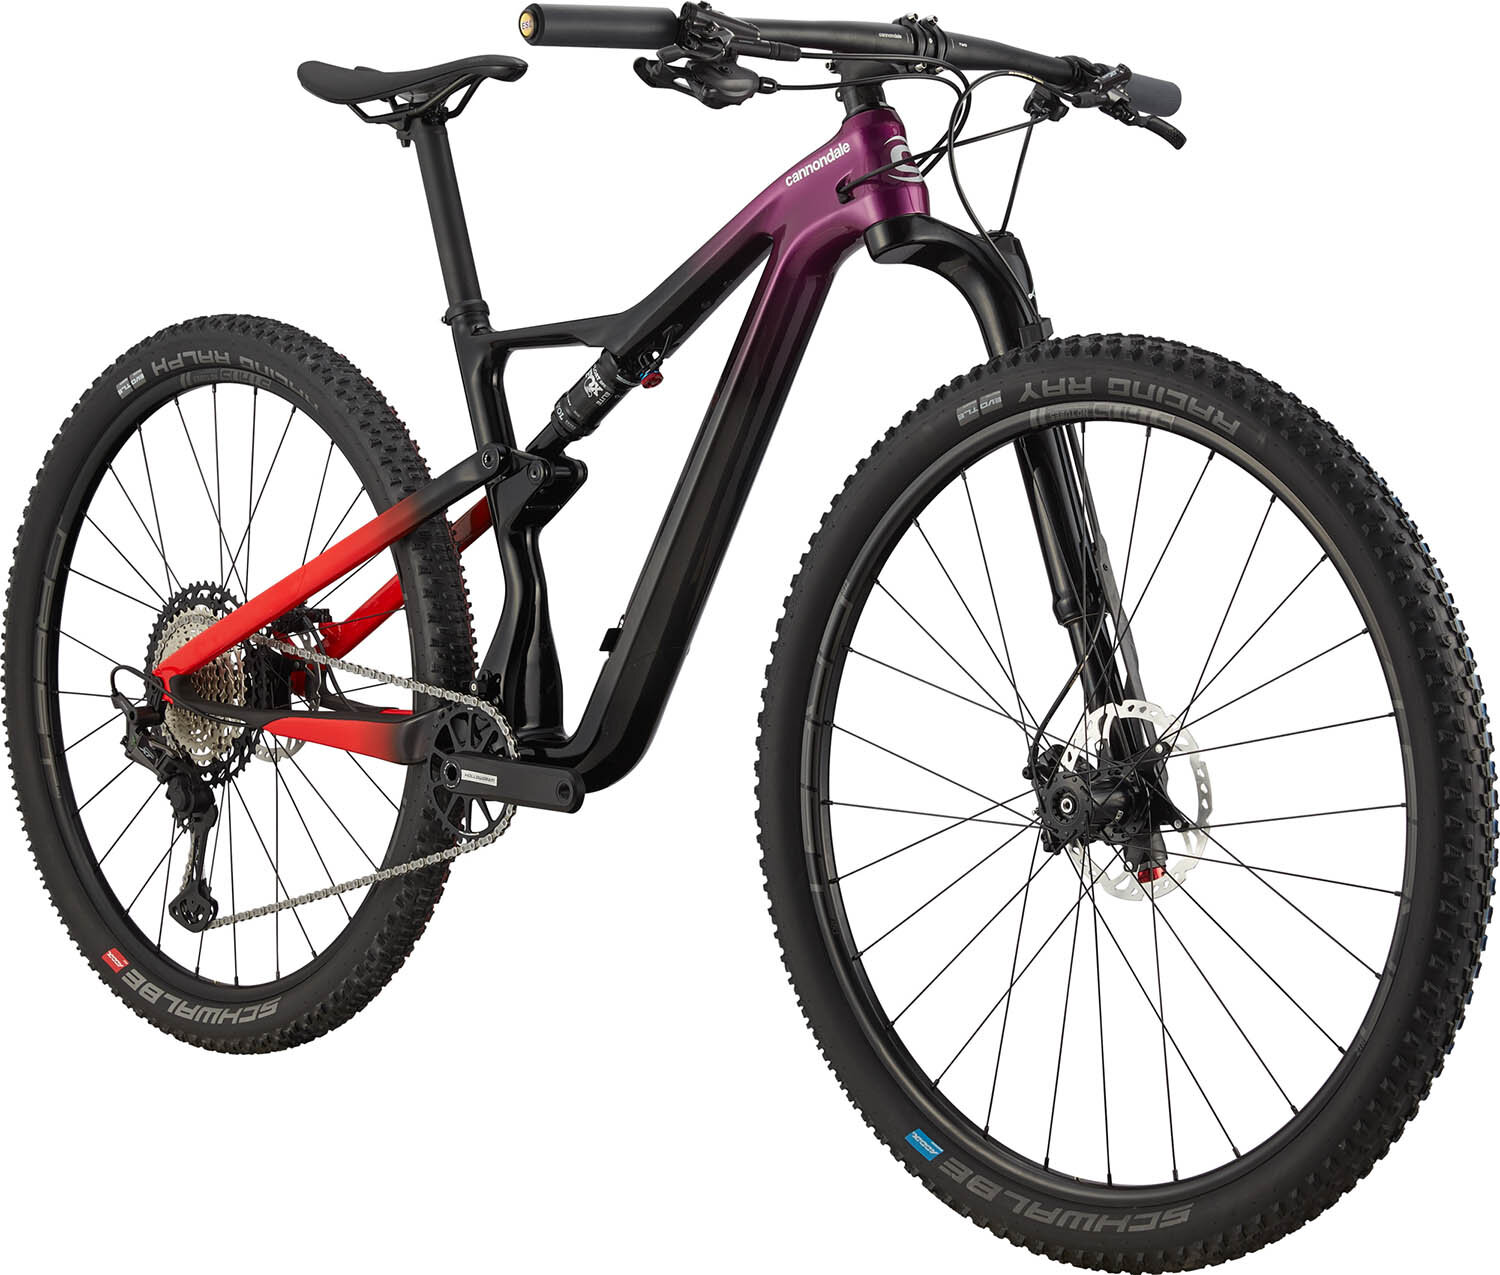 Cannondale_Scalpel_Crb_2_Women's_3Q_LowRes.jpg